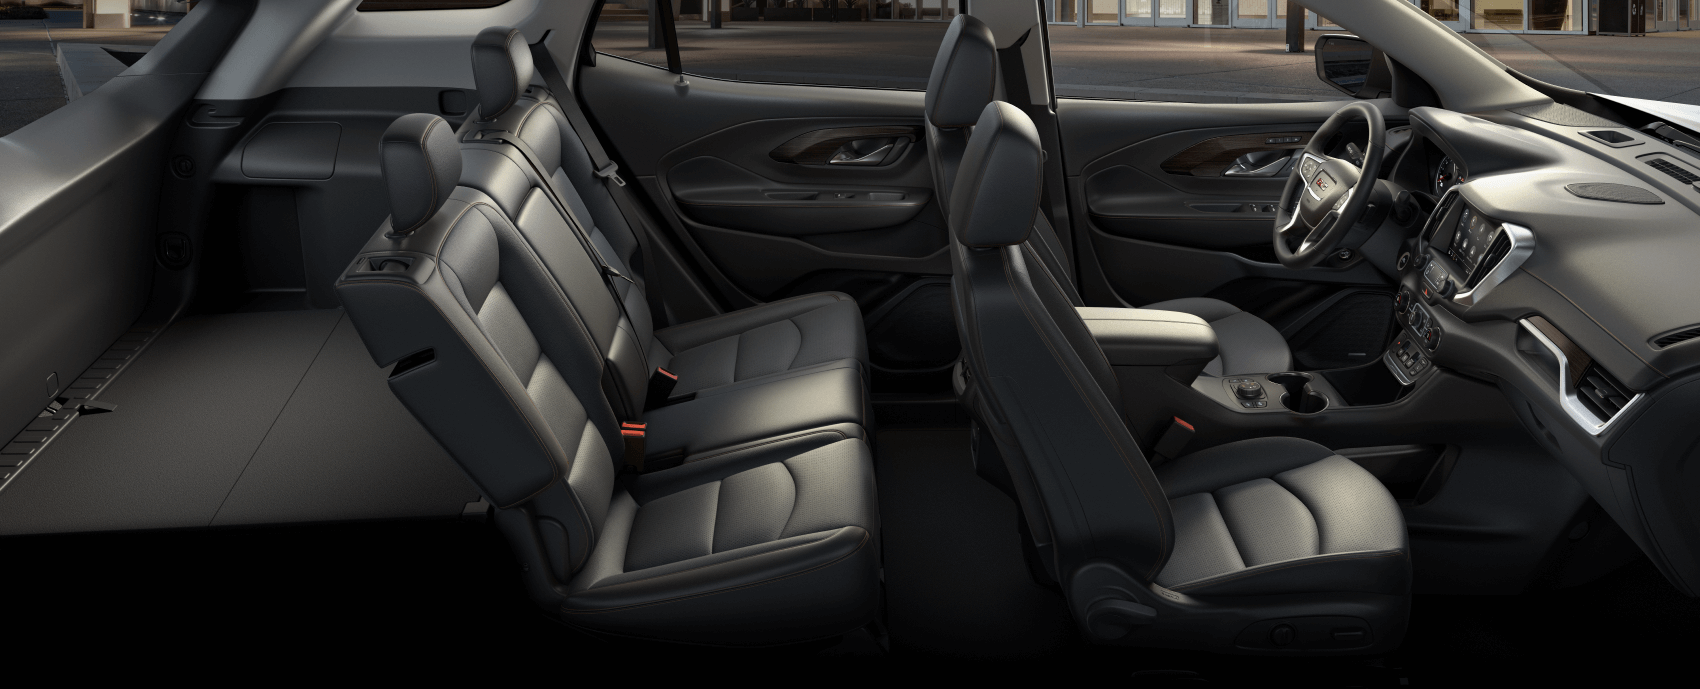 GMC Terrain Interior Fishers IN Andy Mohr Buick GMC